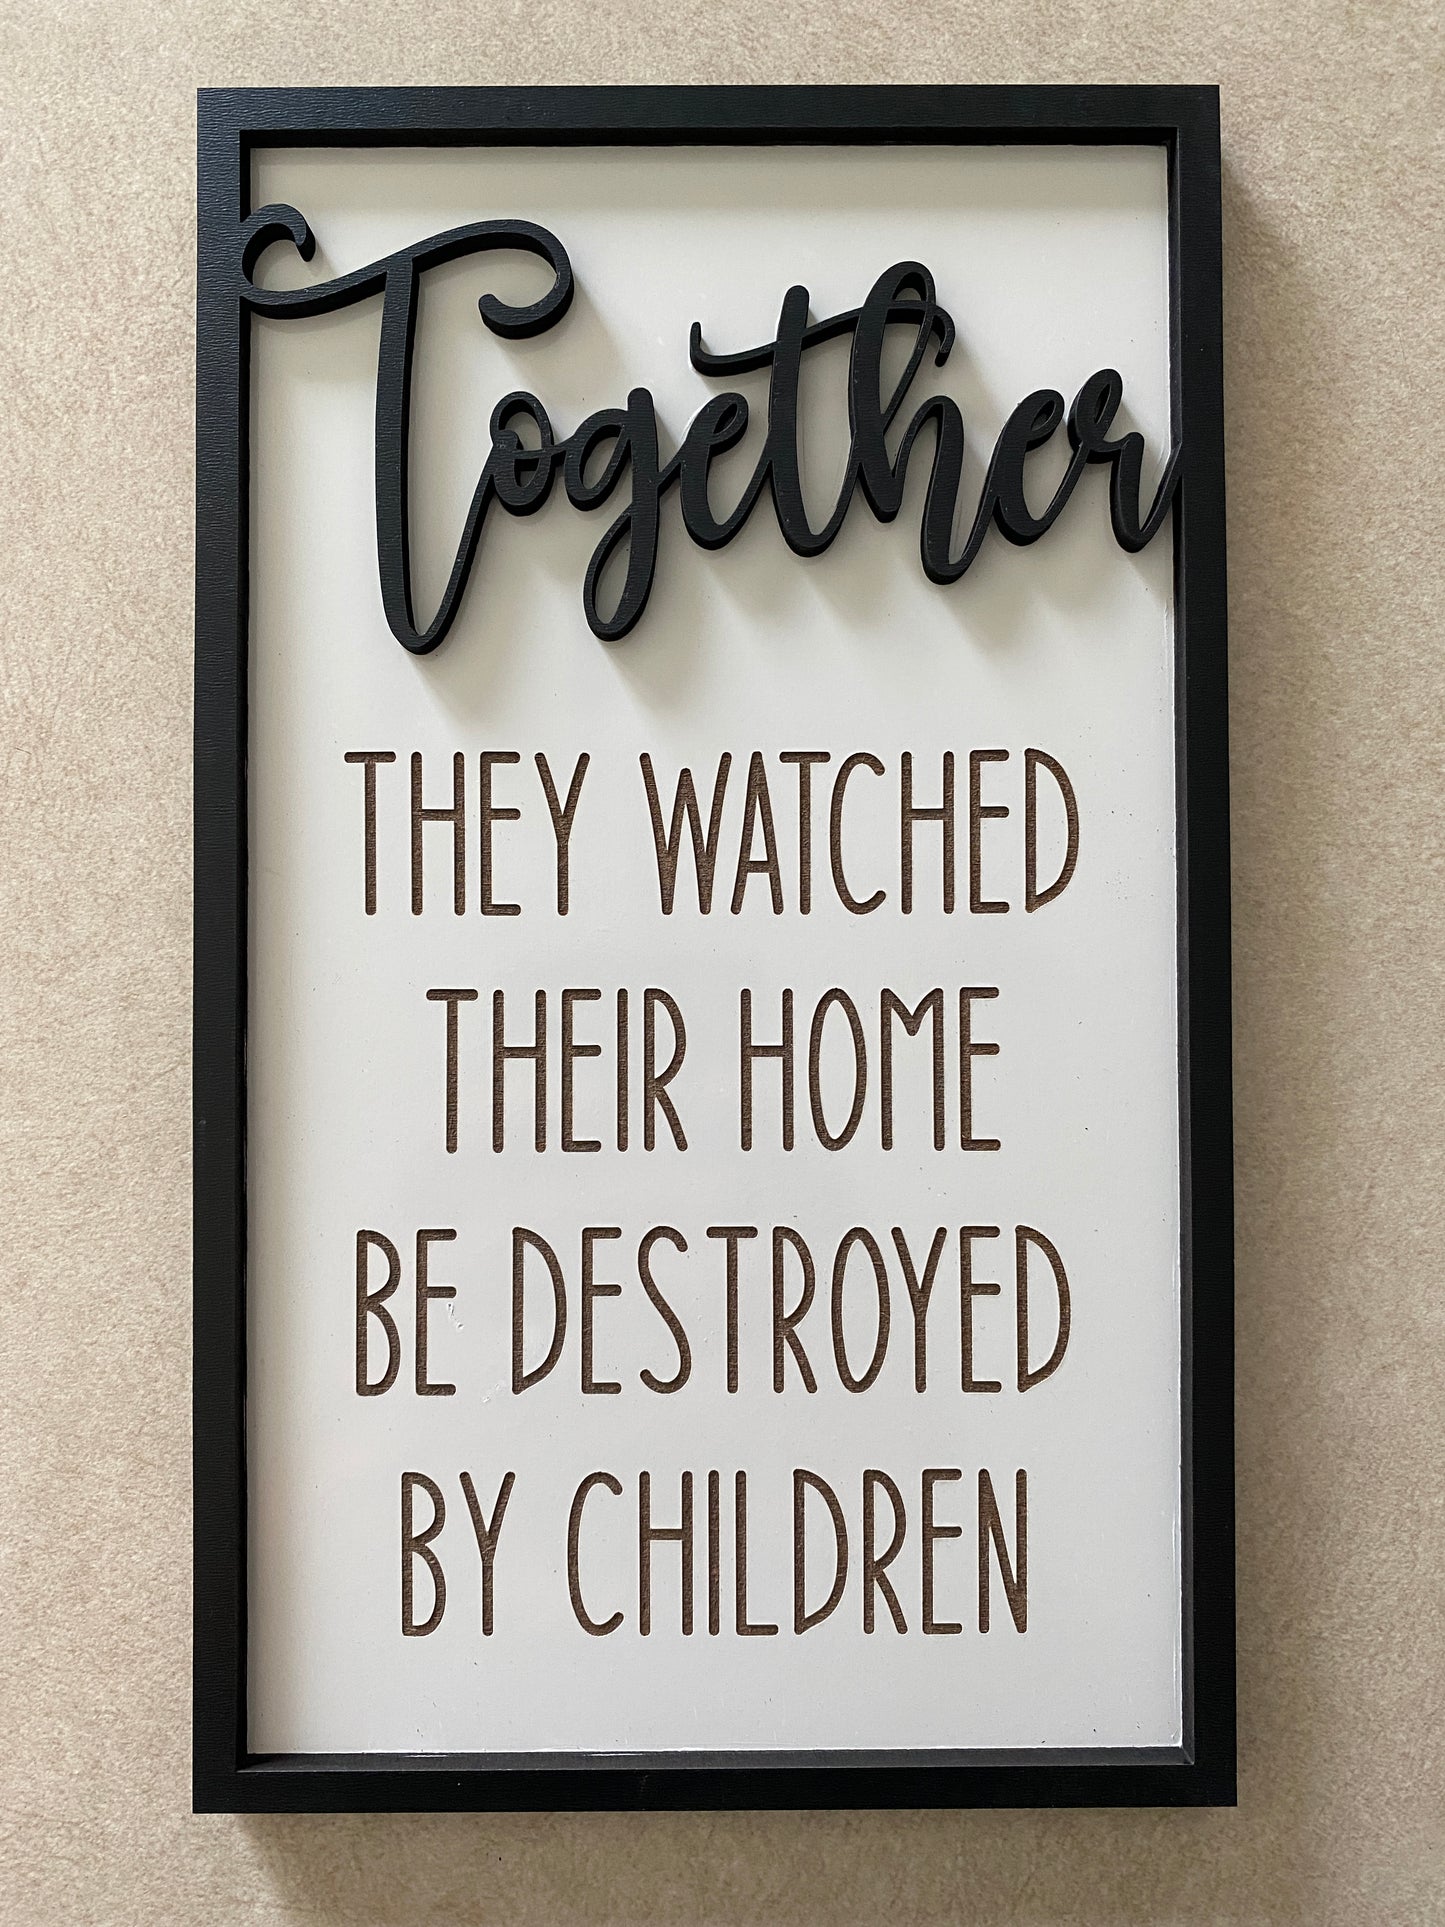 Together They Watched Their Home Be Destroyed By Children sign